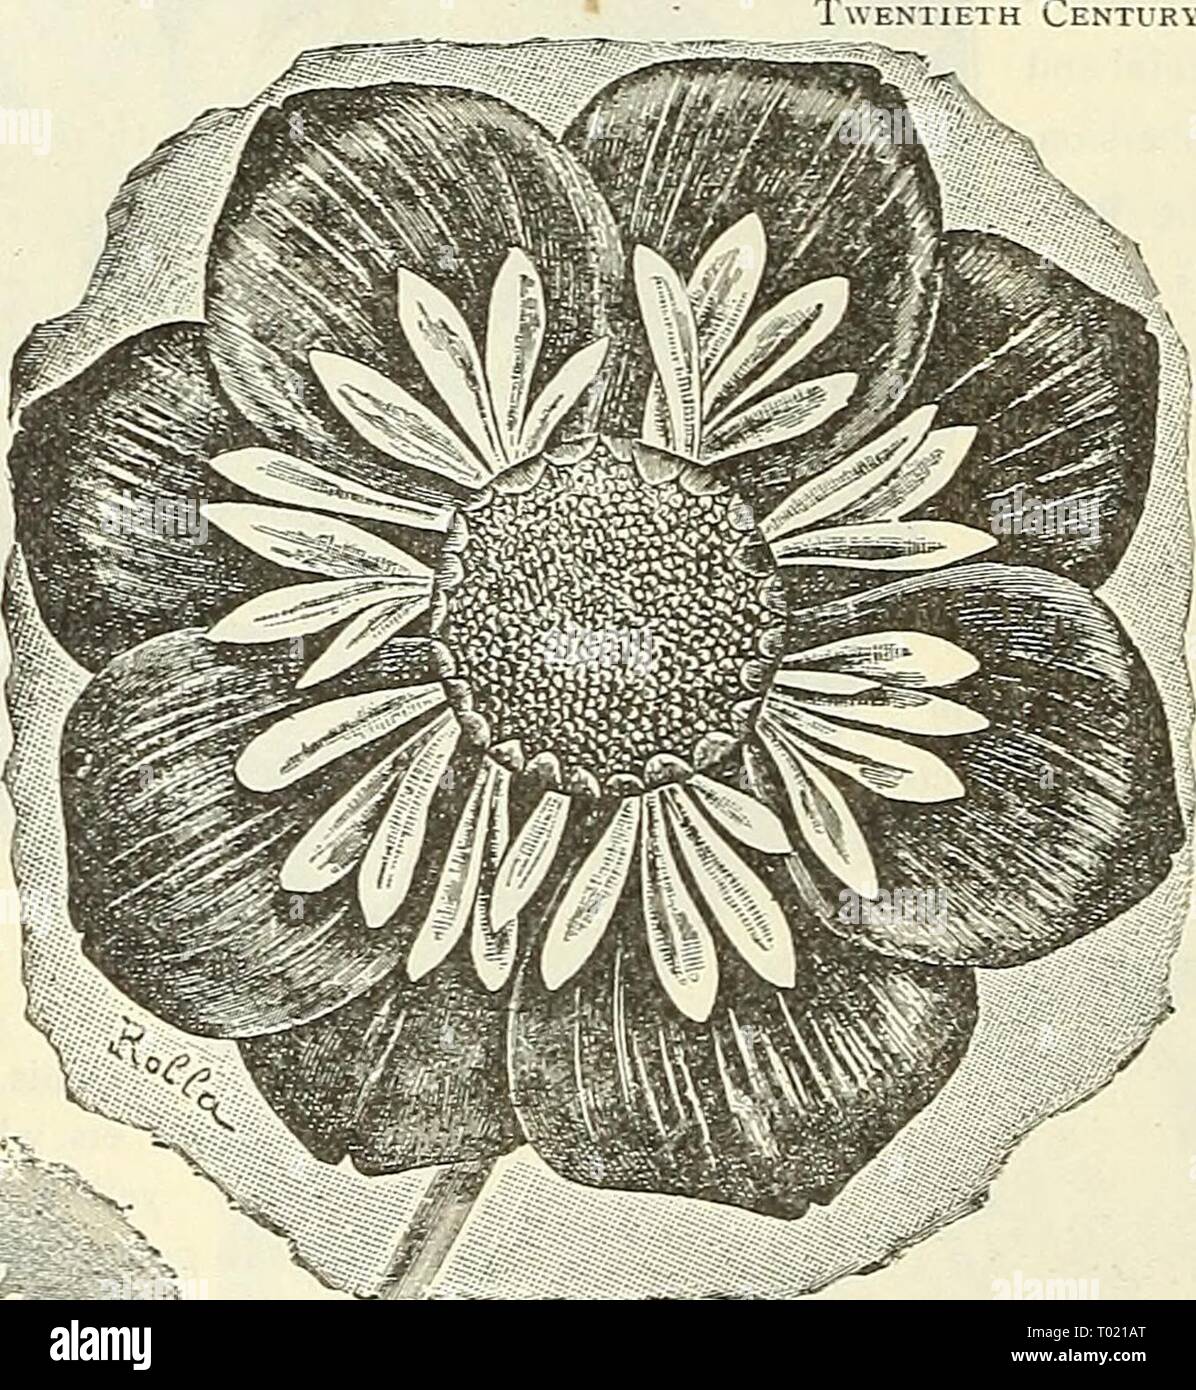 Dreer's garden calendar : 1903 . dreersgardencale1903henr Year: 1903  Dahlia. ' - â â -â â / Gaillardia Gkandiflora Semi-plena. Gaillardia Grandiflora Semi-plena. No hardy perennial ex- cels G. grandiflora in all- round excellence, and any new departure should be given a trial. The new semi-double variety here offered is identical to the type. In the flowers the ray florets appear in two or three superposed rows, and assume either a tubular or la broad ianceolated form. I In color they vary, like the type, from golden to light yellow, tinged at the base with wine-red, forming a fine contrast t Stock Photo